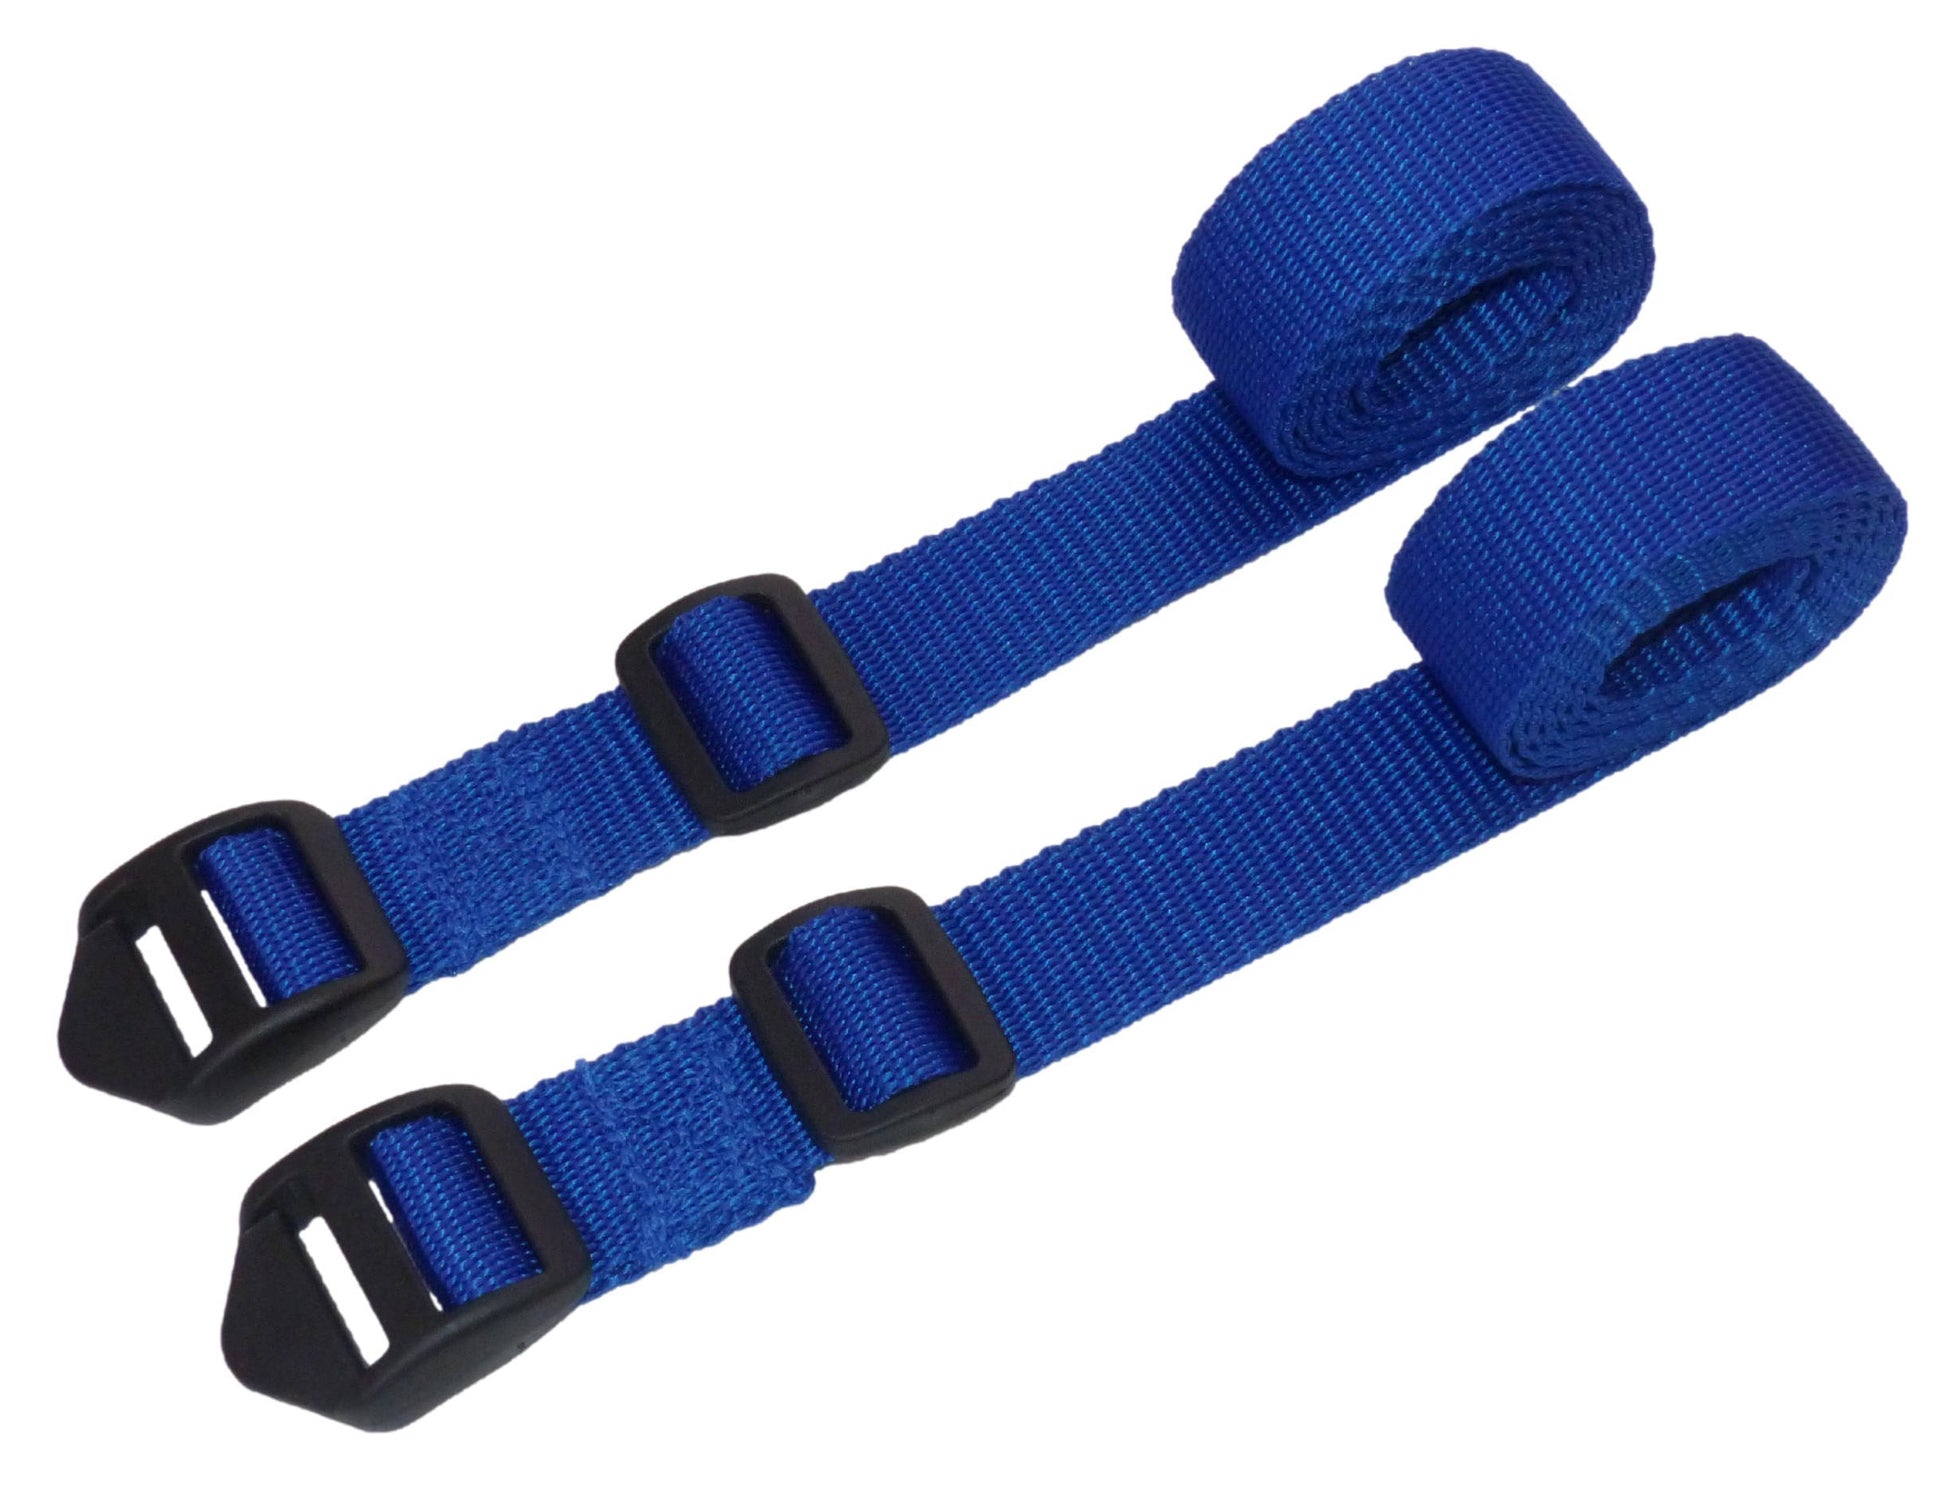 The Benristraps 25mm Camping Straps, 150cm (pair) in blue